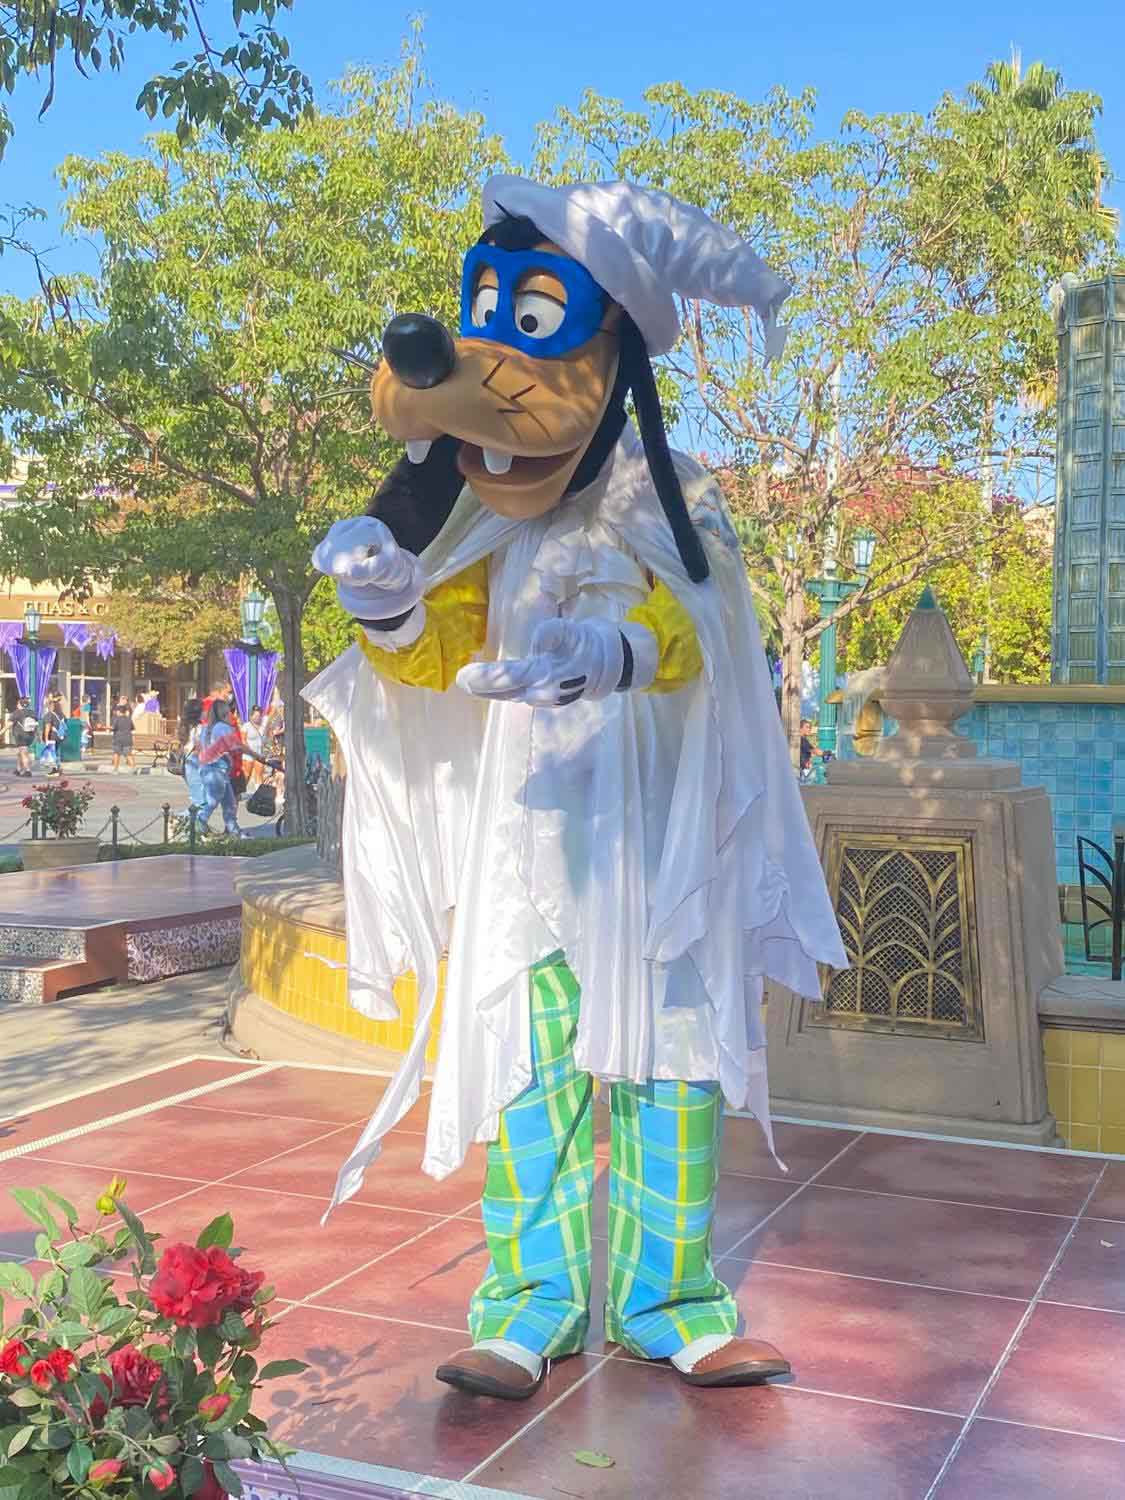 Goofy dressed as a ghost